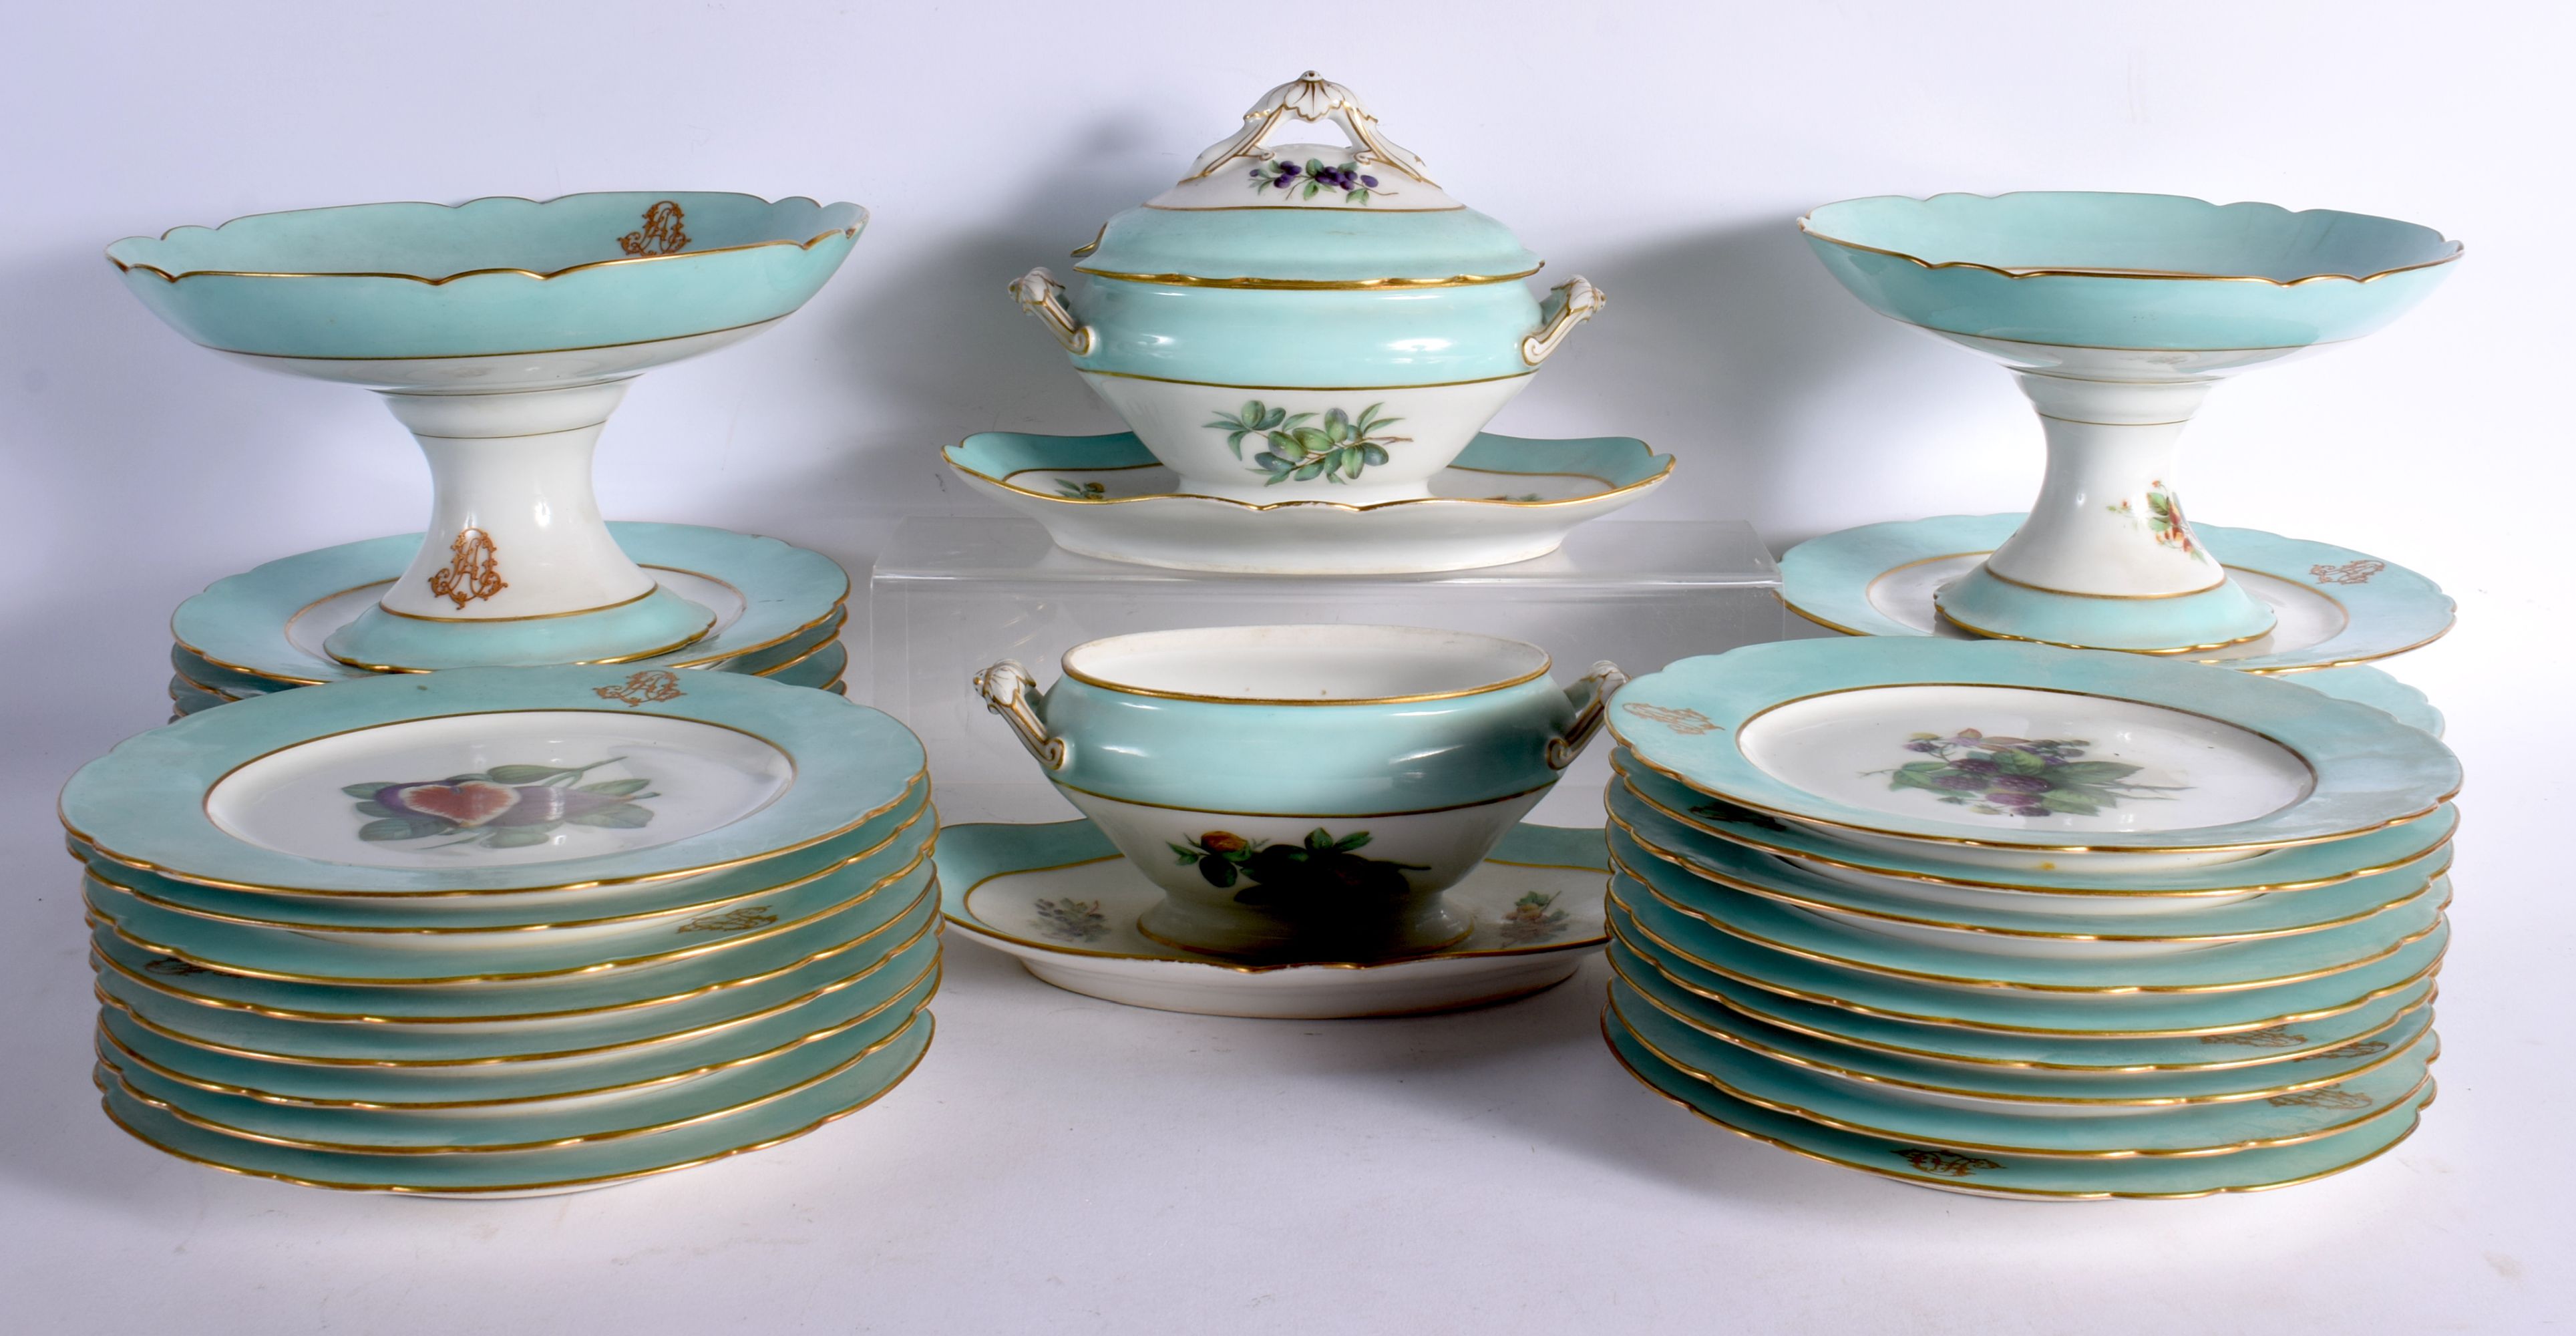 A LARGE AND EXTENSIVE LATE 19TH CENTURY FRENCH PORCELAIN DINNER SERVICE painted with a monogram. Lar